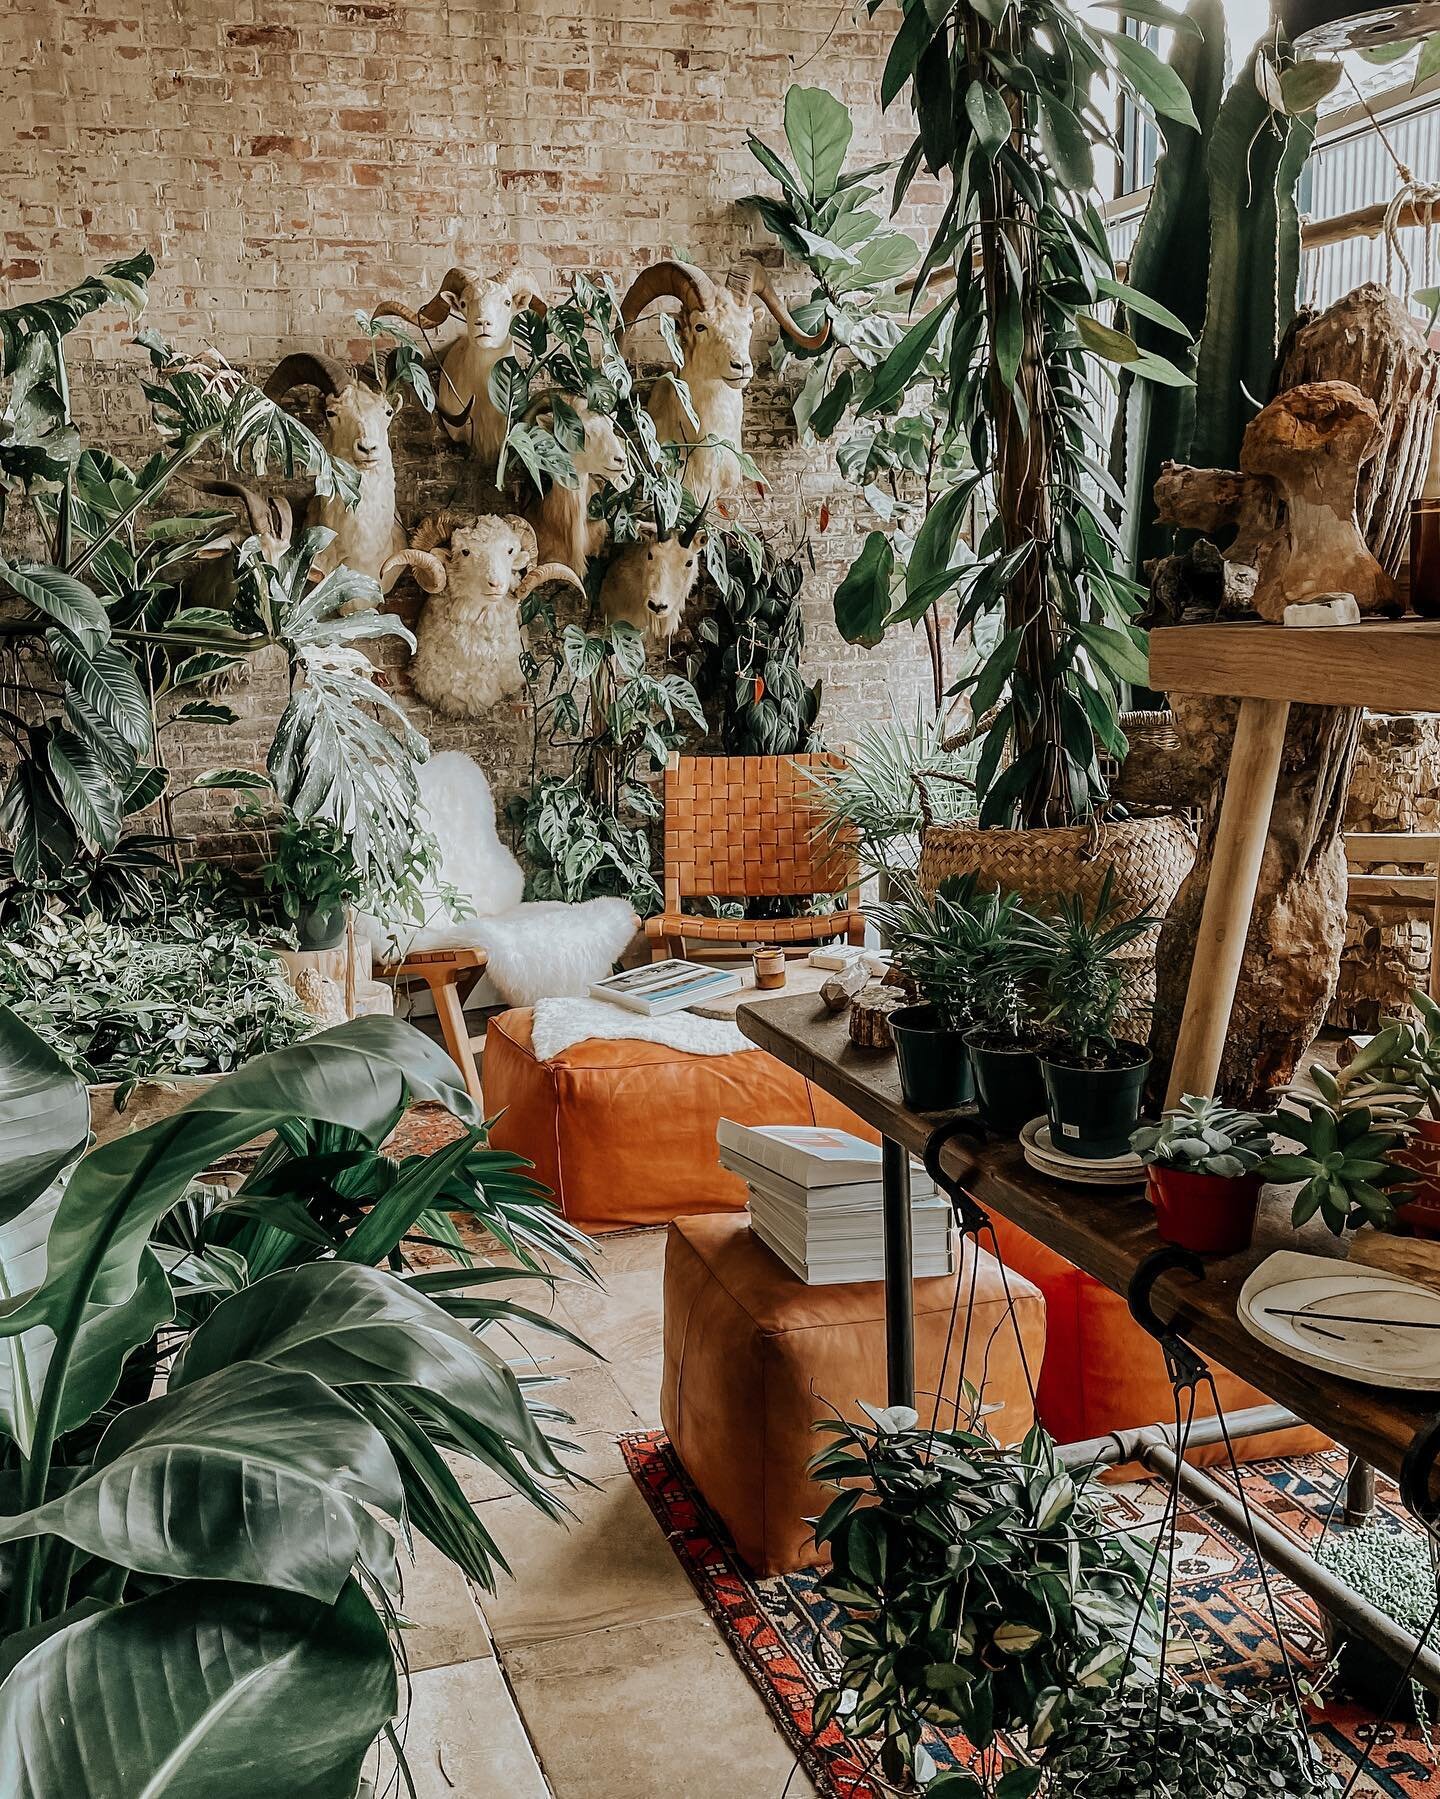 My plant collection has grown exponentially in the last two years and I have a feeling I'm not the only one 🌿

Boston has no shortage of lovely plant shops, but @SeedtoStem out in Worcester is worth the trip. The space is gorgeous, and they have eve